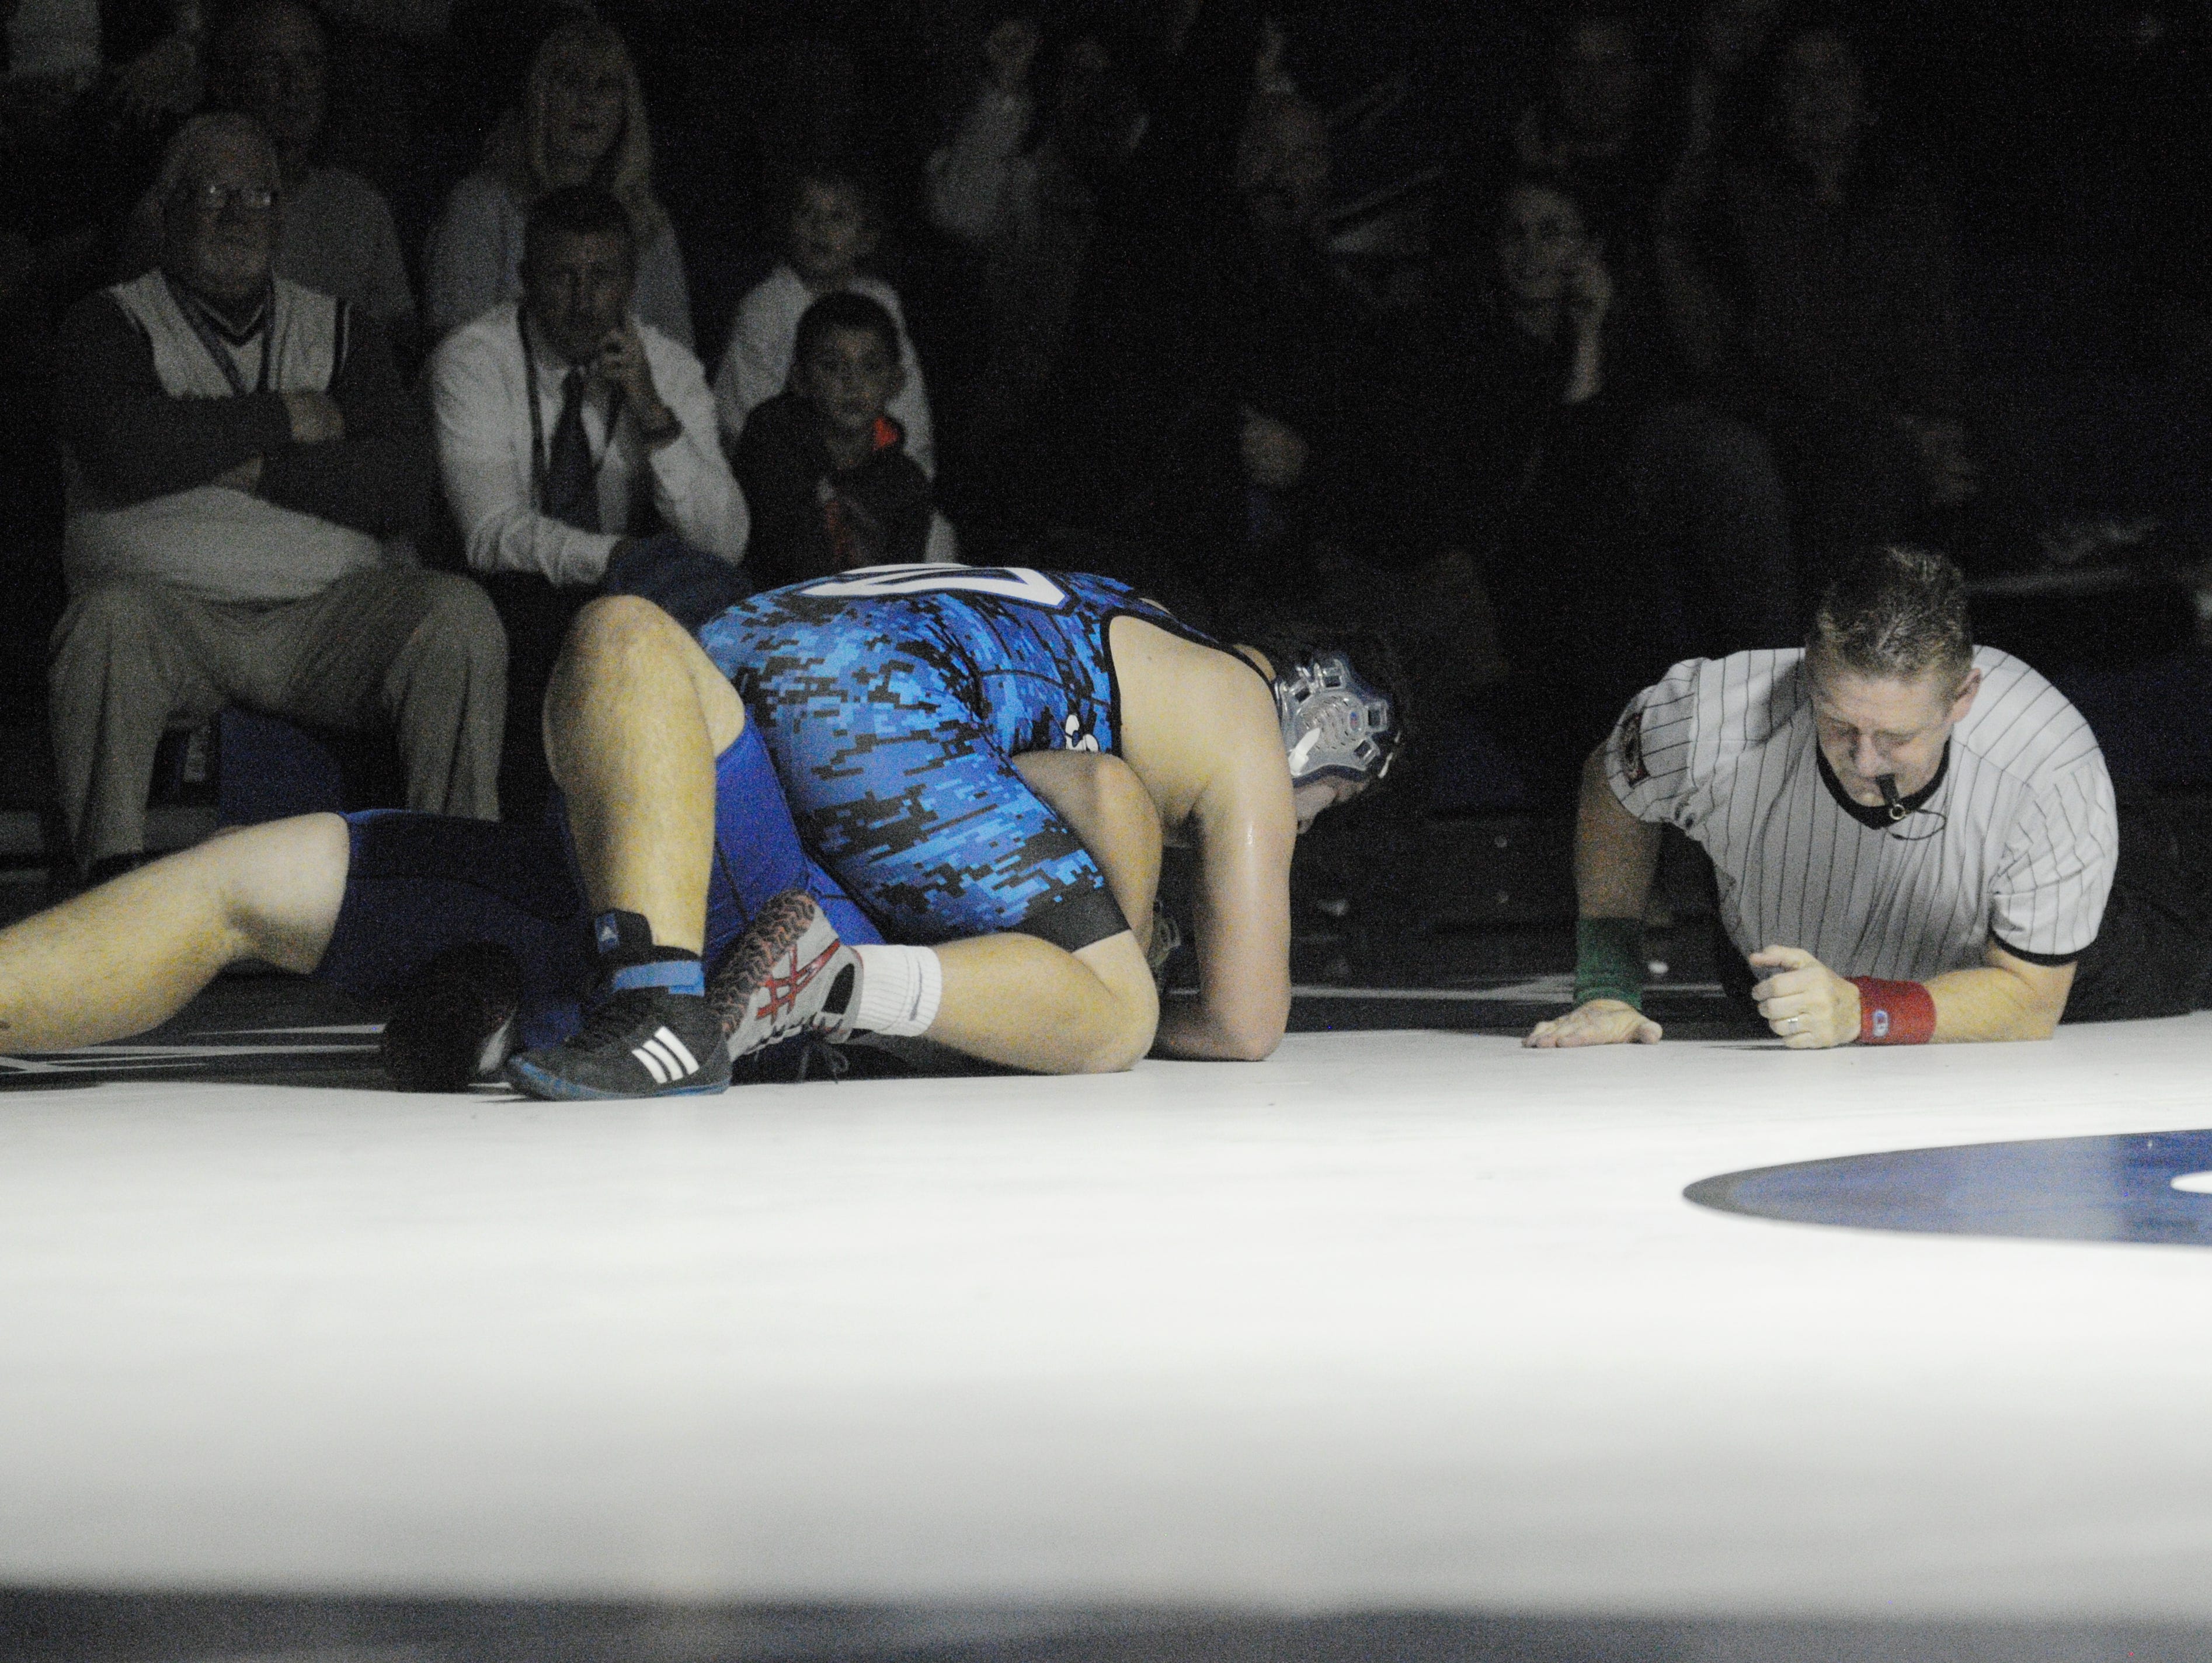 Stephen Decatur's Jian Joobeen pins North Caroline's Jacob Schultz in the last second of the third period of the 285-pound class matchup in Berlin on Wednesday.